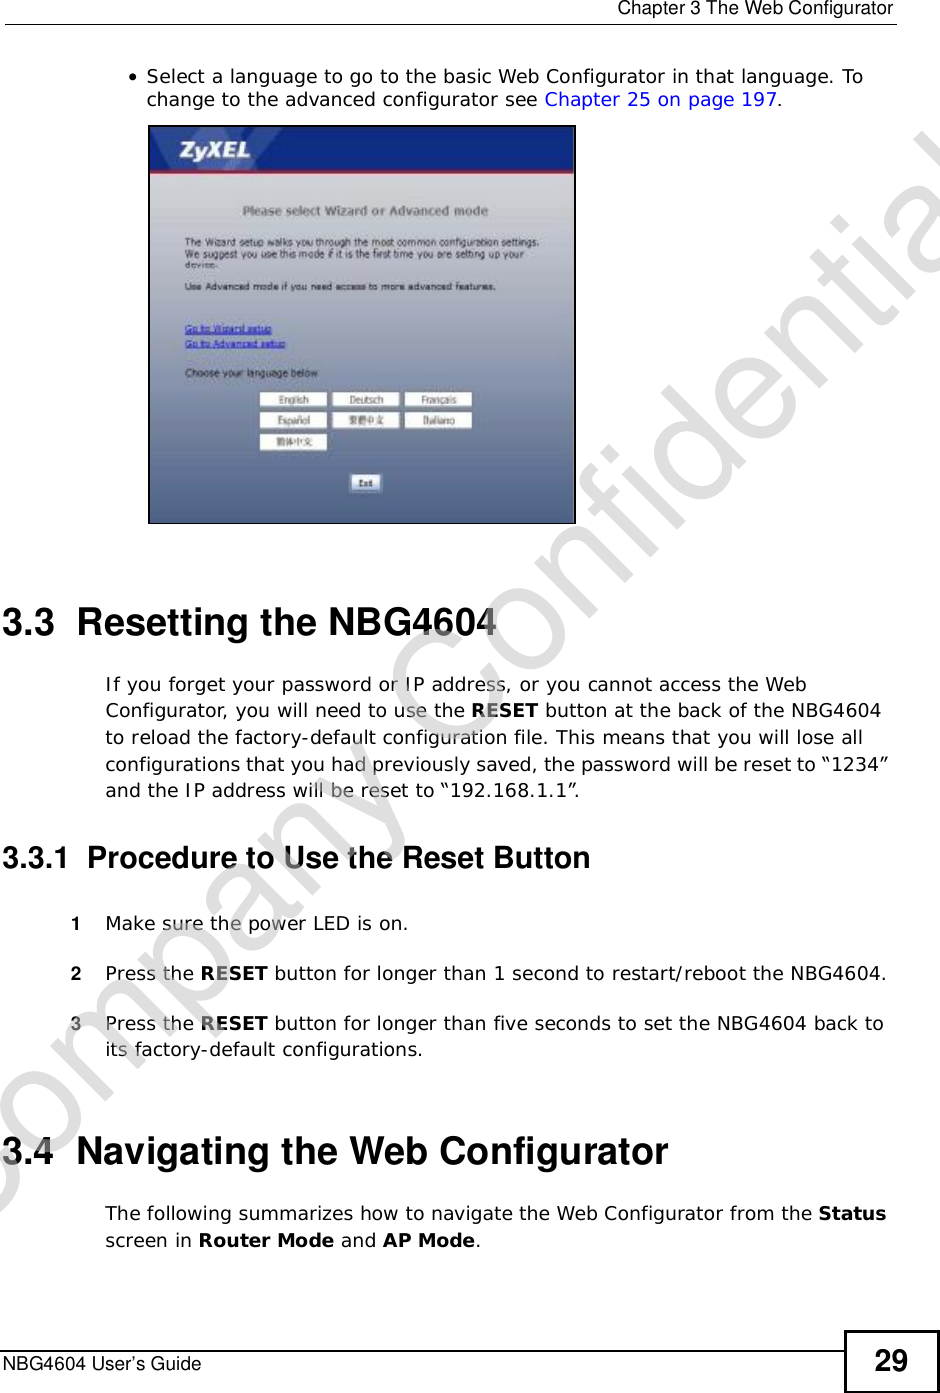  Chapter 3The Web ConfiguratorNBG4604 User’s Guide 29•Select a language to go to the basic Web Configurator in that language. To change to the advanced configurator see Chapter 25 on page 197.3.3  Resetting the NBG4604If you forget your password or IP address, or you cannot access the Web Configurator, you will need to use the RESET button at the back of the NBG4604 to reload the factory-default configuration file. This means that you will lose all configurations that you had previously saved, the password will be reset to “1234” and the IP address will be reset to “192.168.1.1”.3.3.1  Procedure to Use the Reset Button1Make sure the power LED is on.2Press the RESET button for longer than 1 second to restart/reboot the NBG4604.3Press the RESET button for longer than five seconds to set the NBG4604 back to its factory-default configurations.3.4  Navigating the Web Configurator    The following summarizes how to navigate the Web Configurator from the Statusscreen in Router Mode and AP Mode.Company Confidential